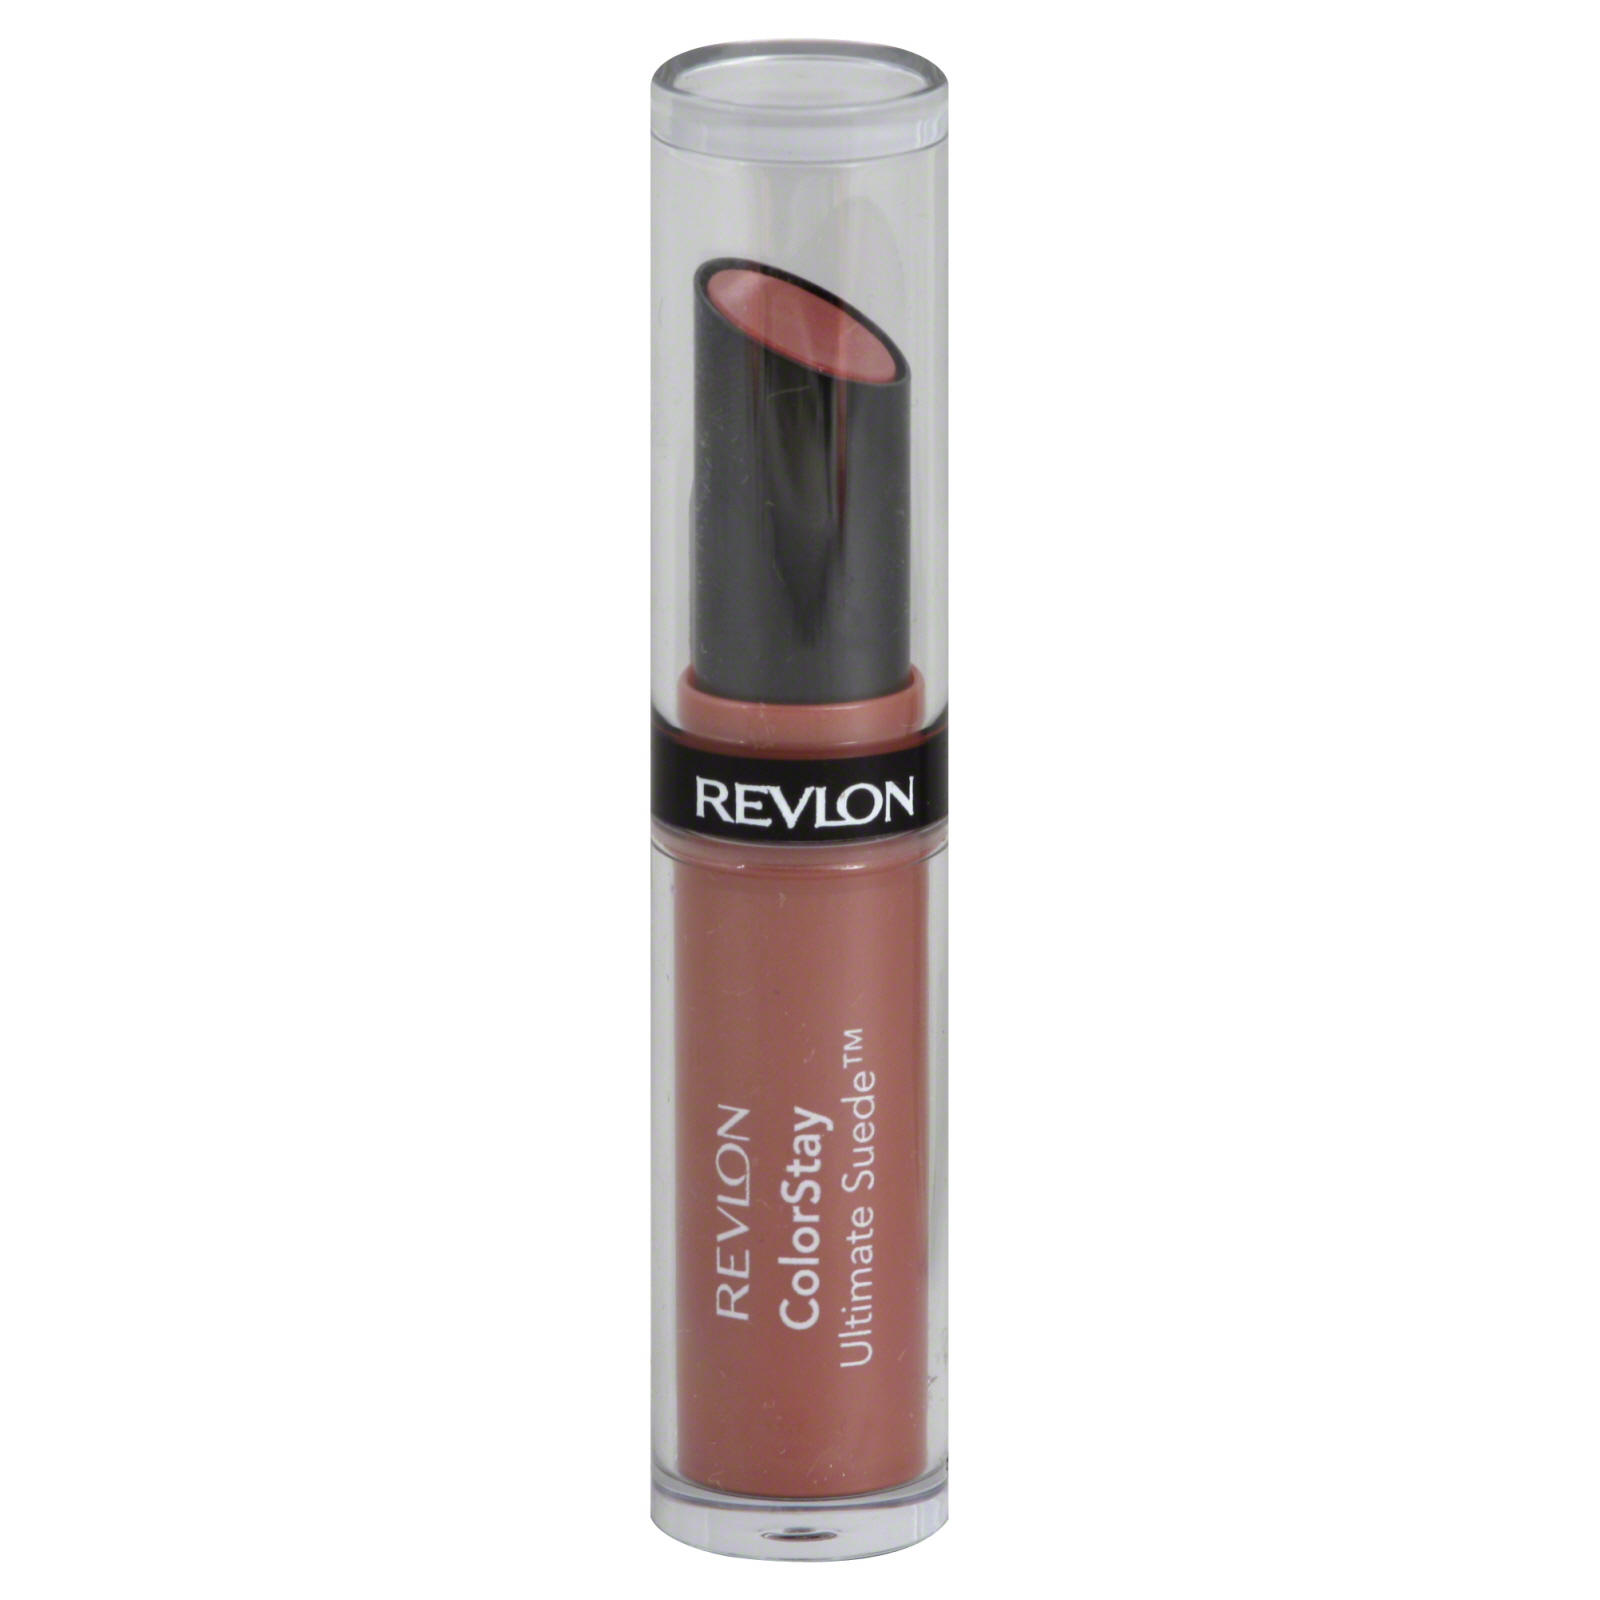 ColorStay Ultimate Suede Lipstick, Iconic 055, 0.09 oz (255 g)